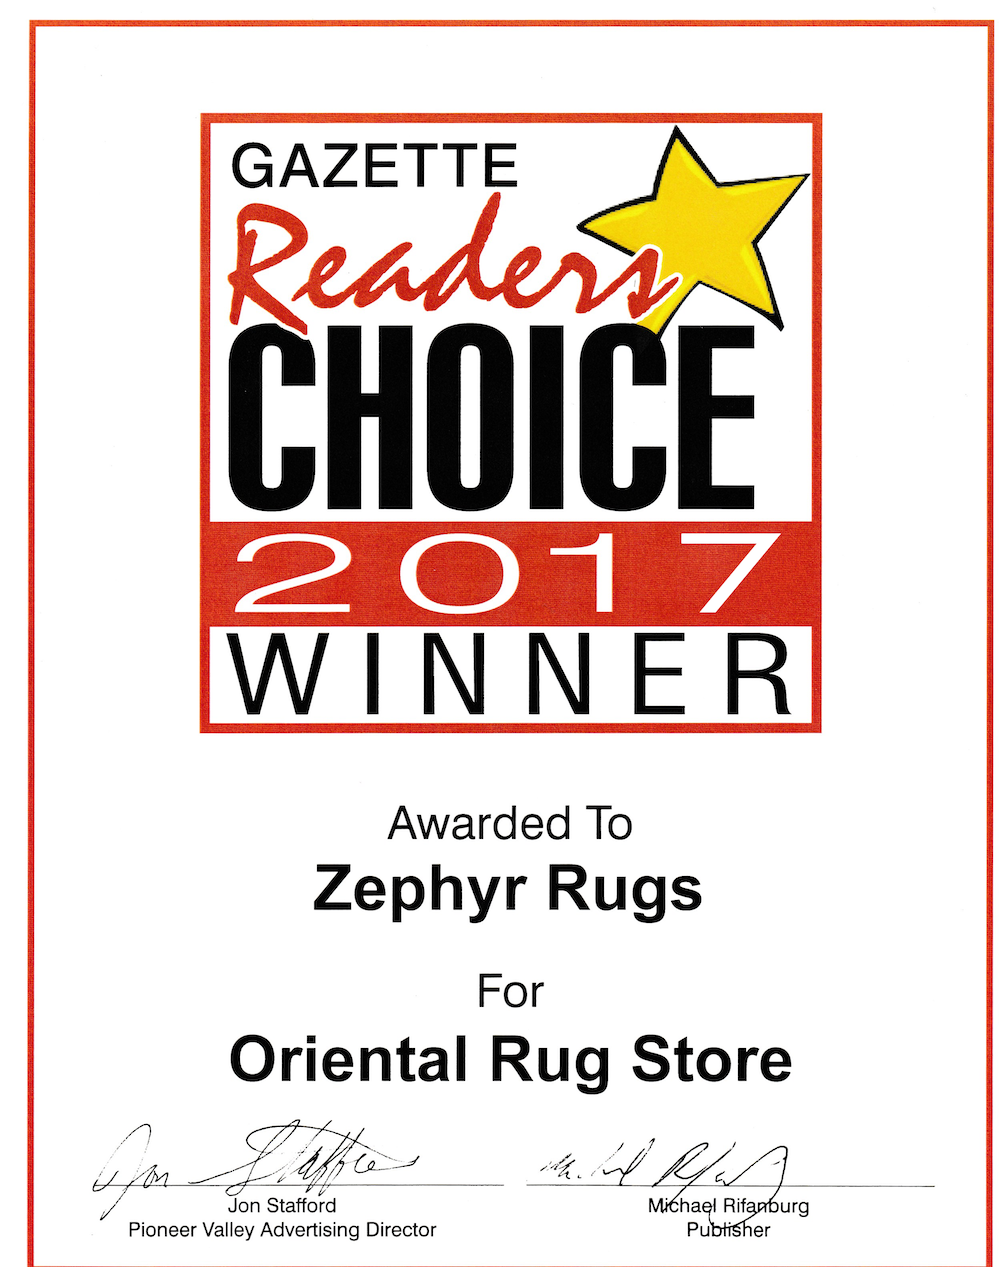 Zephyr Rugs Voted Best Oriental Rug Store by Hampshire Gazette Reader's Choice 2017